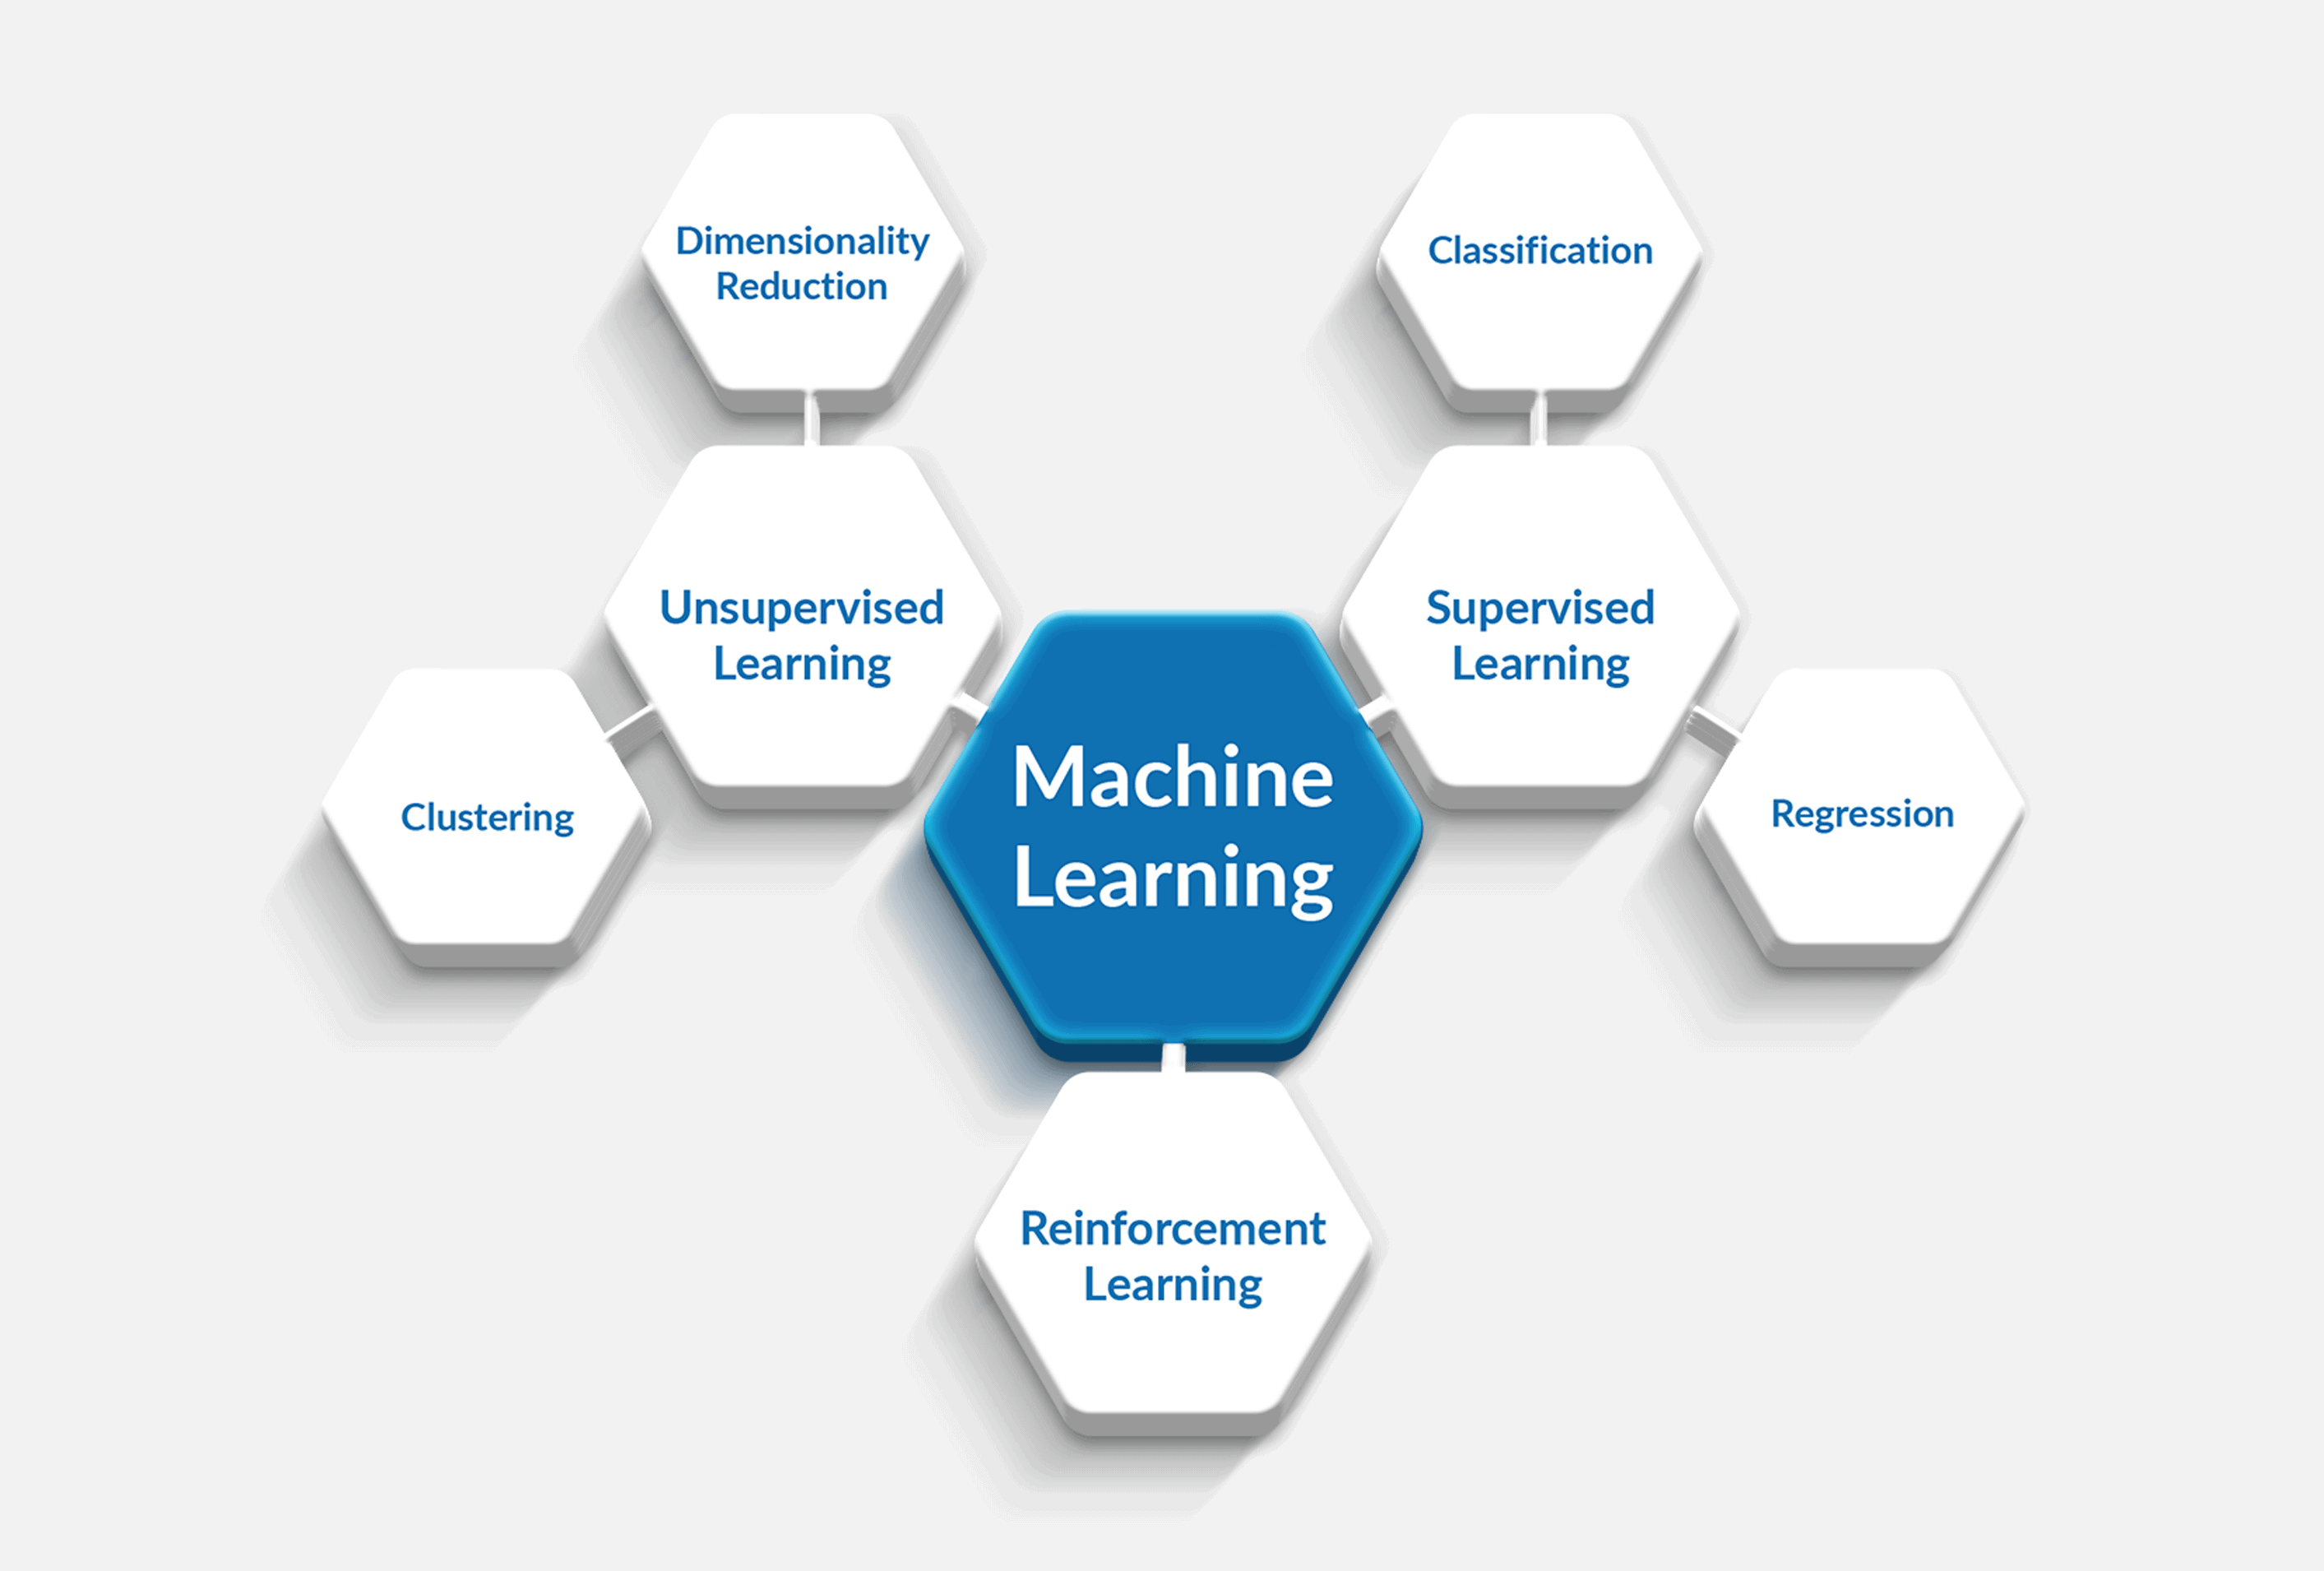 classification in machine learning case study